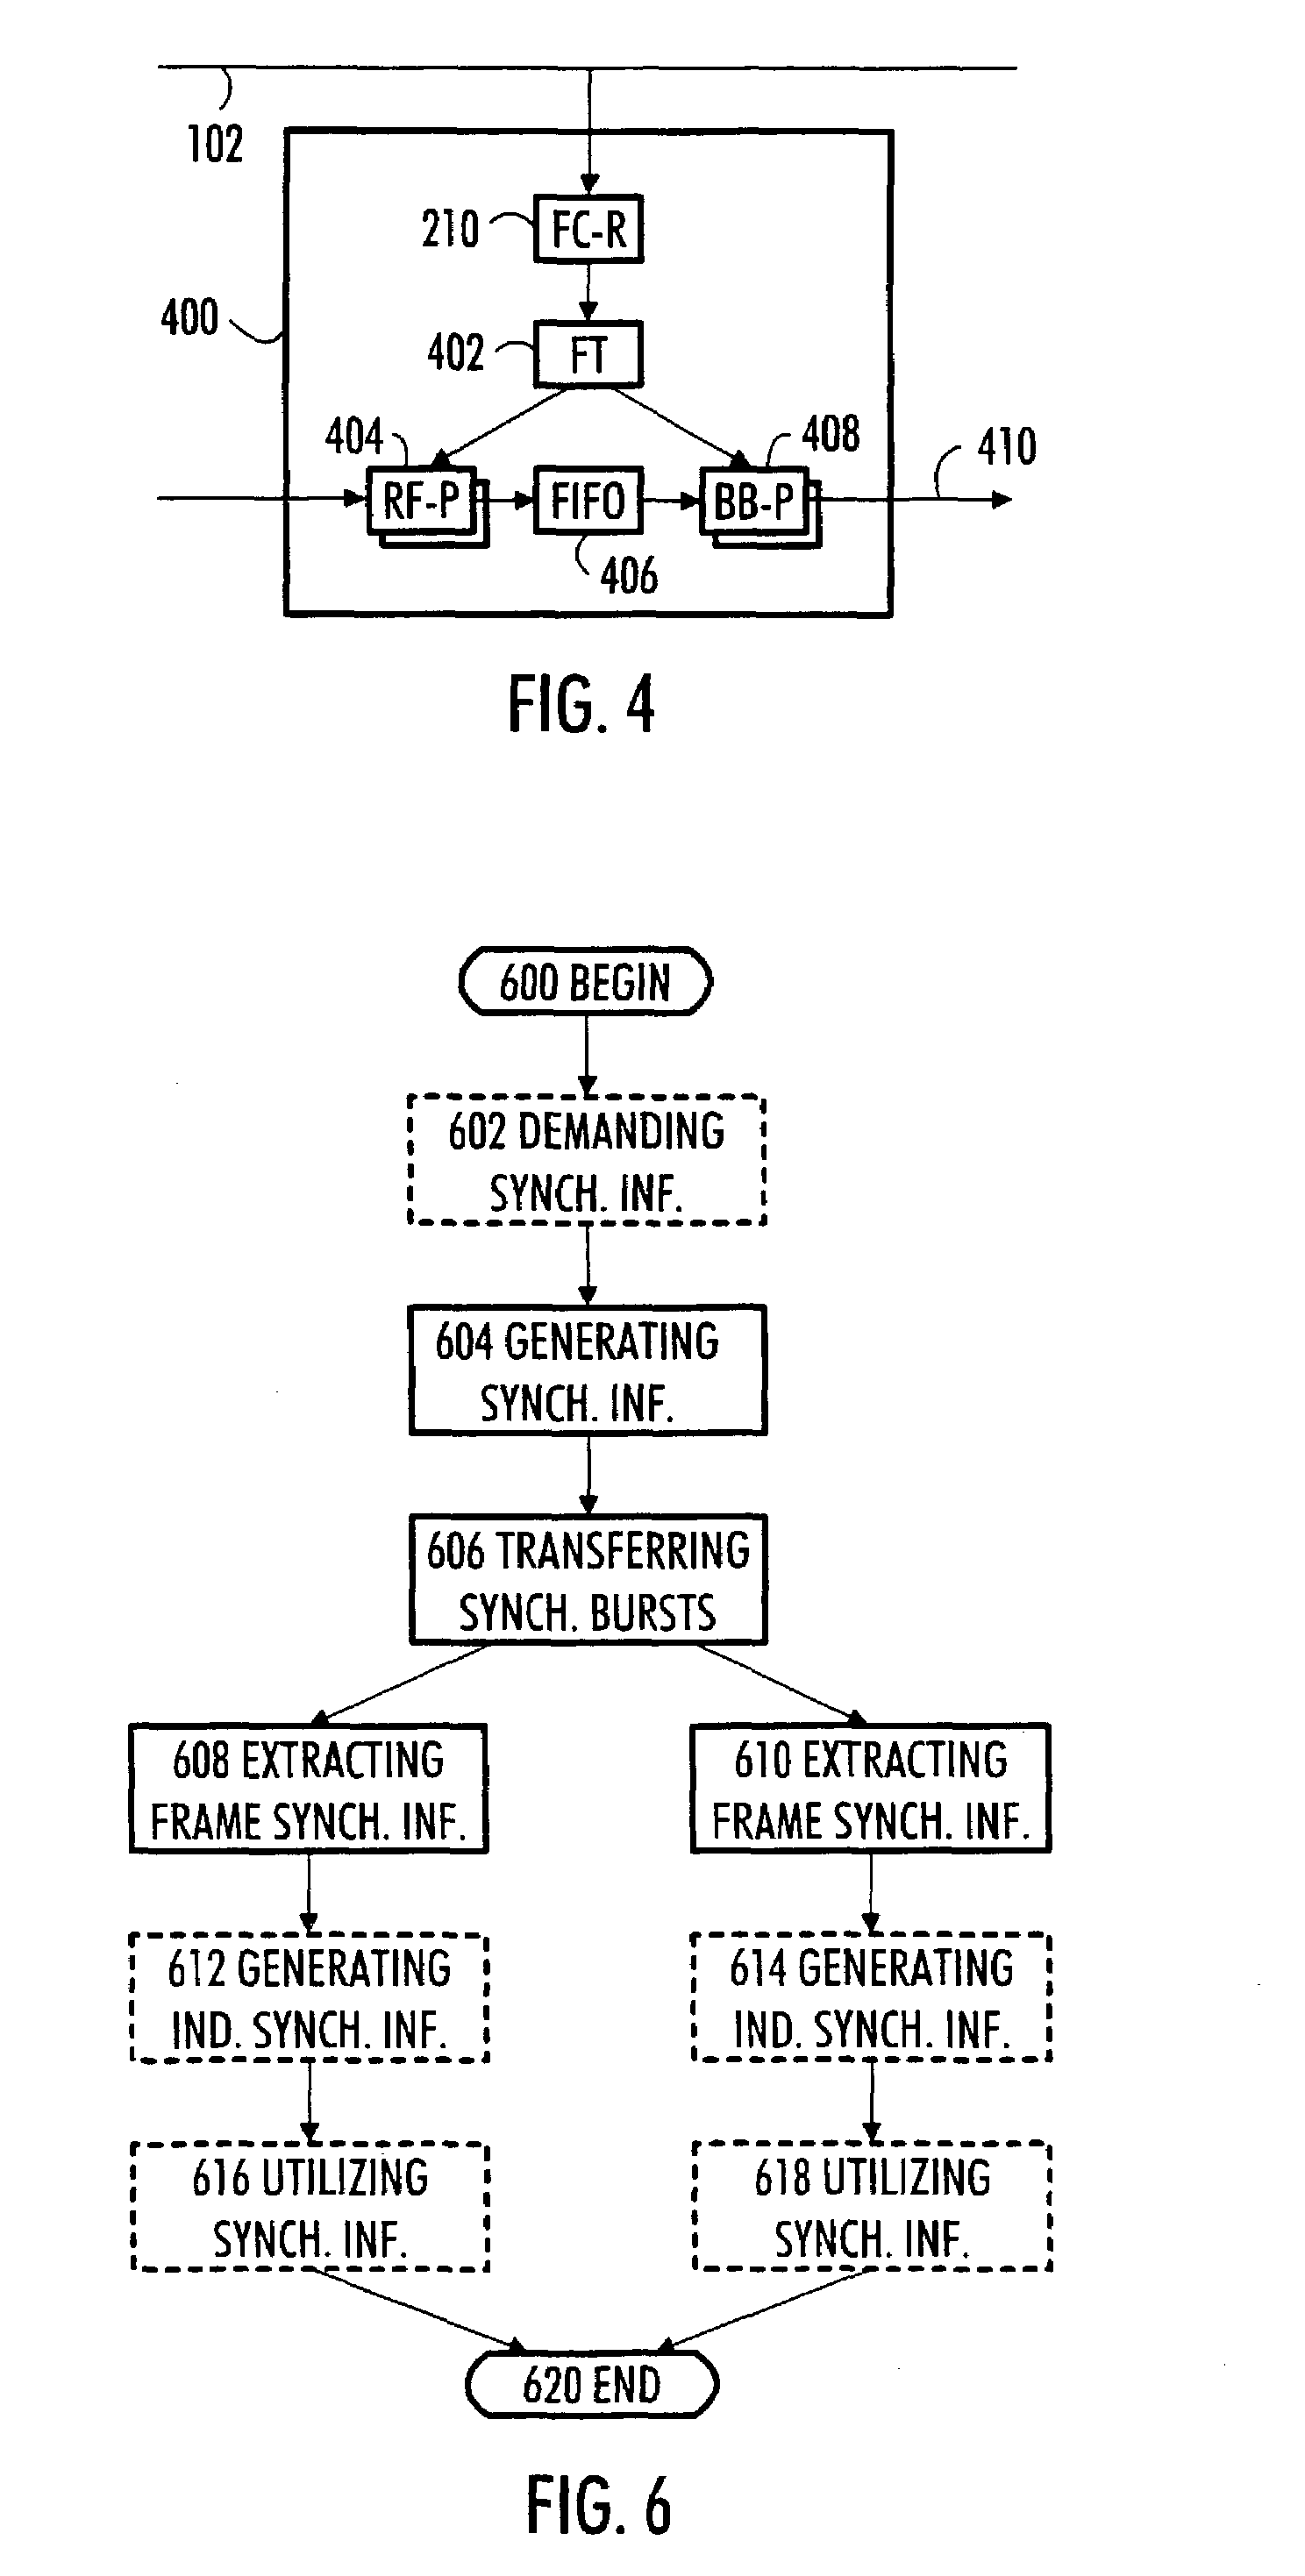 Apparatus and method for distributing frame synchronization information at a base station